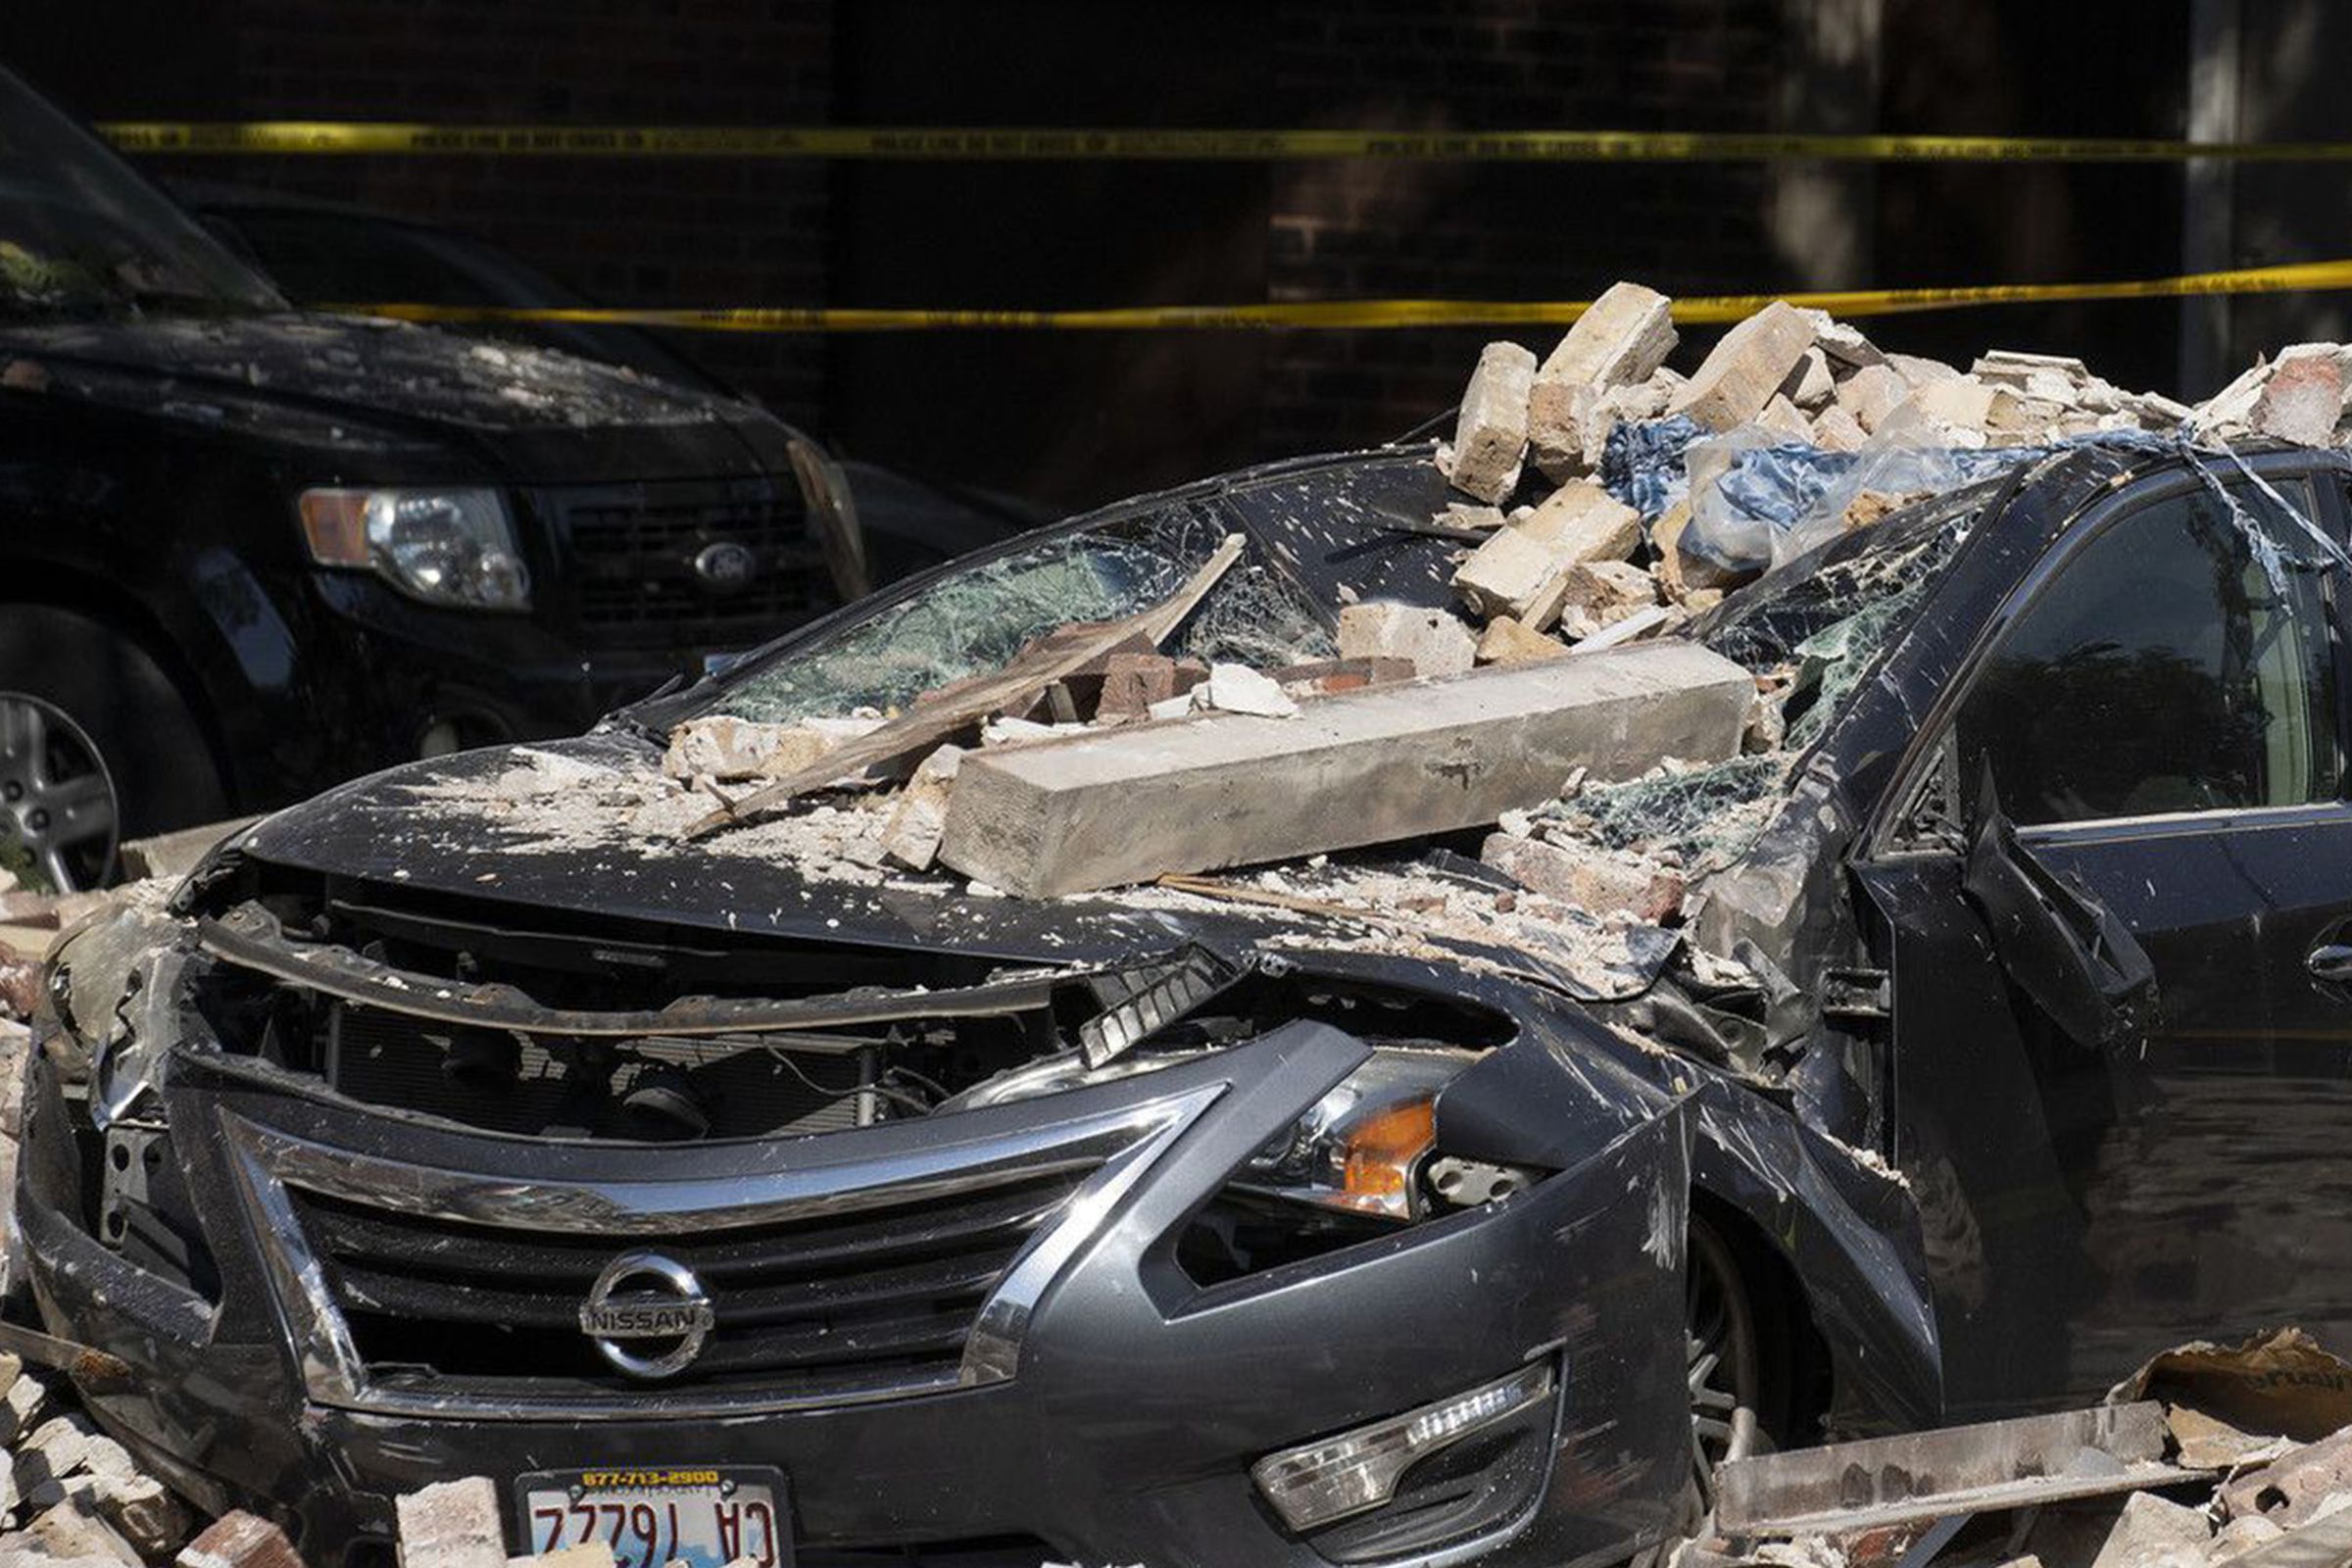 A Chicago firefighter checks a crushed car at the scene where a four-story building partially collapsed due to an explosion on Chicago’s West Side on Tuesday, Sept. 20, 2022.